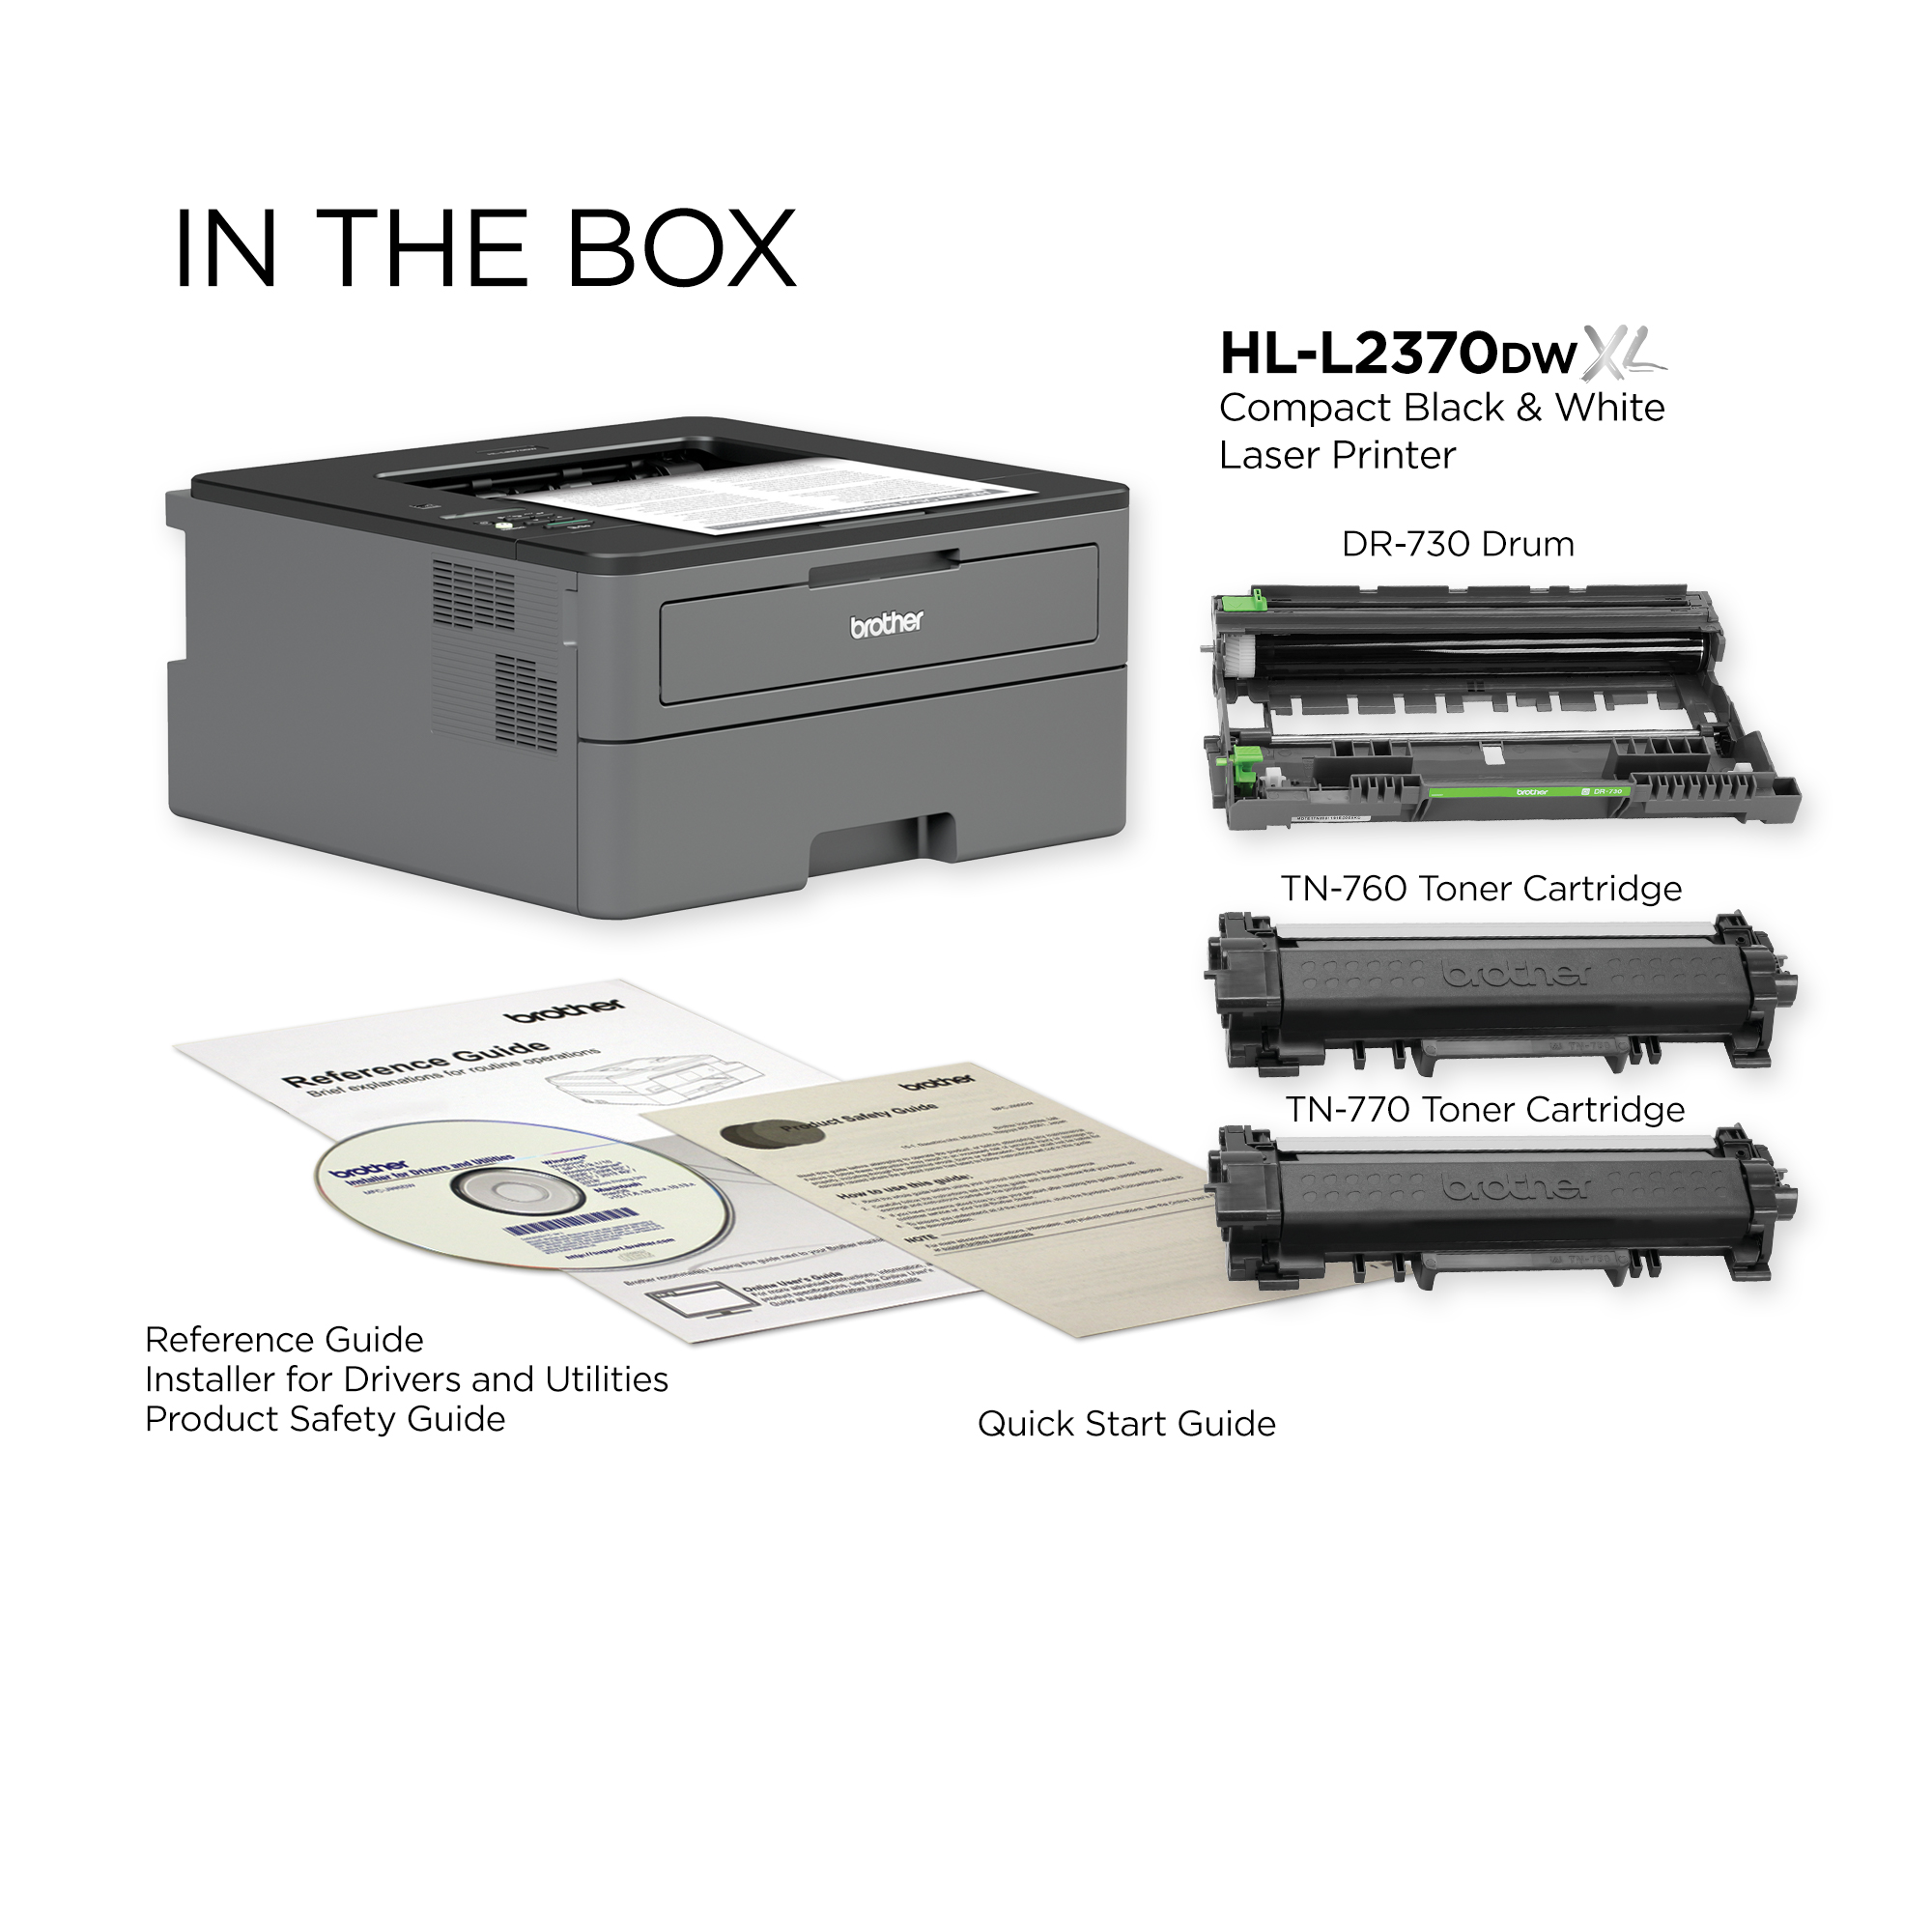 Brother HLL2370DW XL Extended Print Monochrome Laser Printer, up to 2 Years of Toner In-Box - image 3 of 9